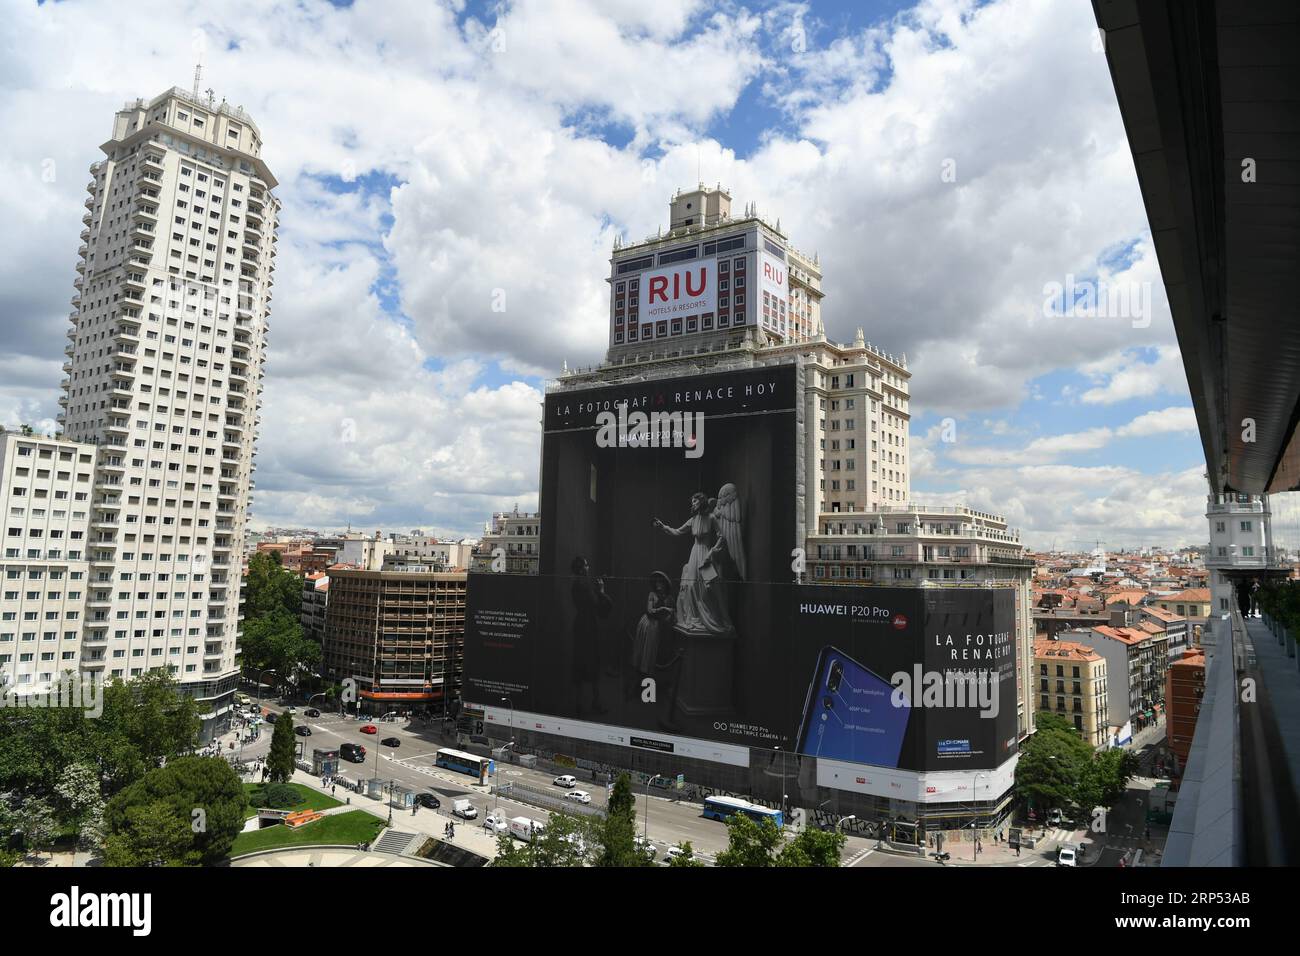 (181125) -- MADRID, Nov. 25, 2018 -- Photo taken on June 12, 2018 shows a scaffold banner advertising Huawei P20 Pro outside a building in Madrid, Spain. More and more Spanish consumers accept Chinese high-tech brands, which now can be seen in daily life across Spain. ) SPAIN-CHINESE-HIGH-TECH-BRANDS GuoxQiuda PUBLICATIONxNOTxINxCHN Stock Photo